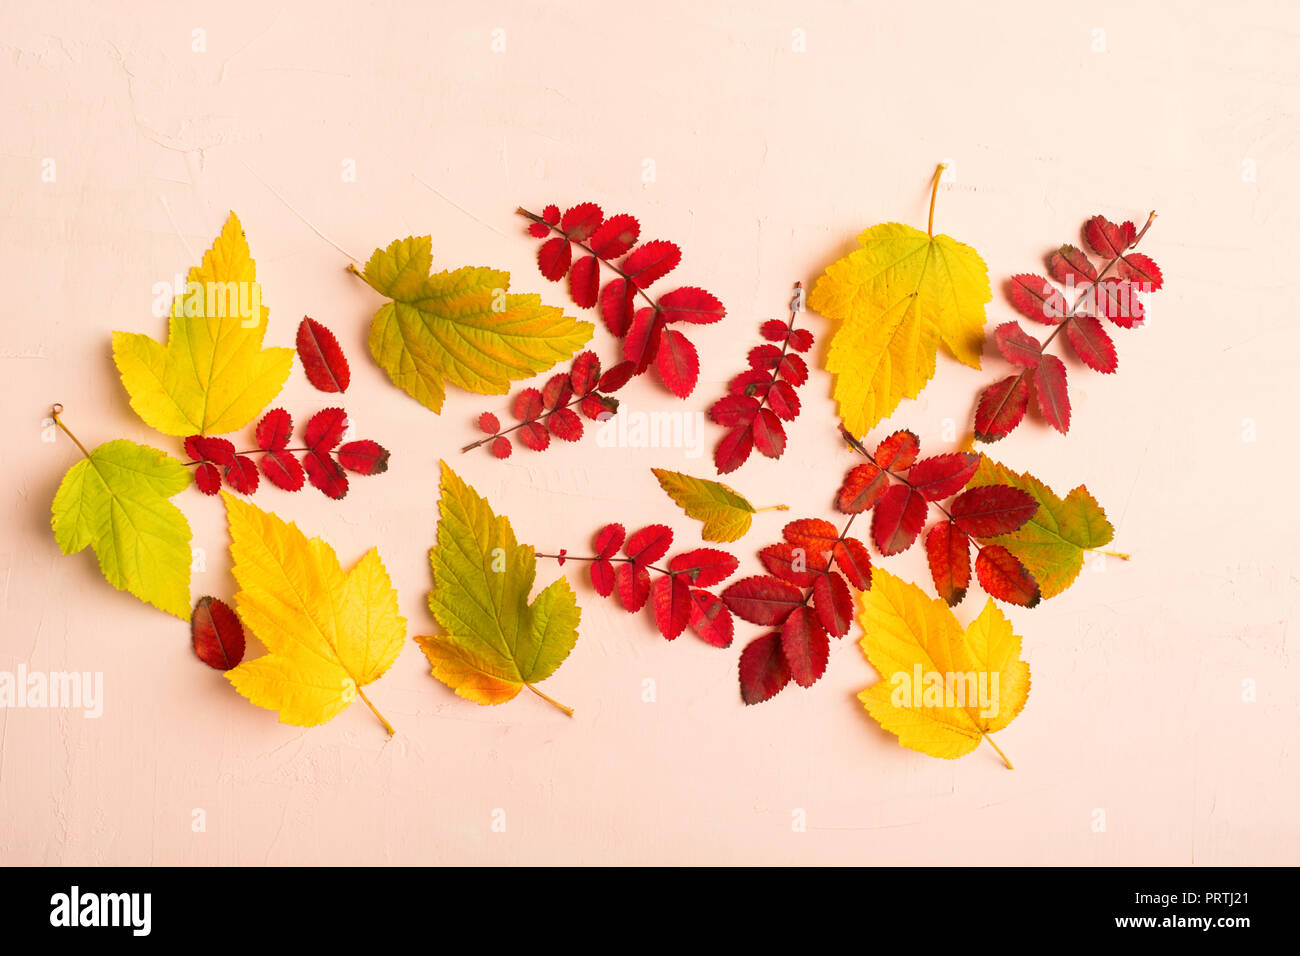 Yellow and red autumn leaves over pastel pink background with copy space Stock Photo